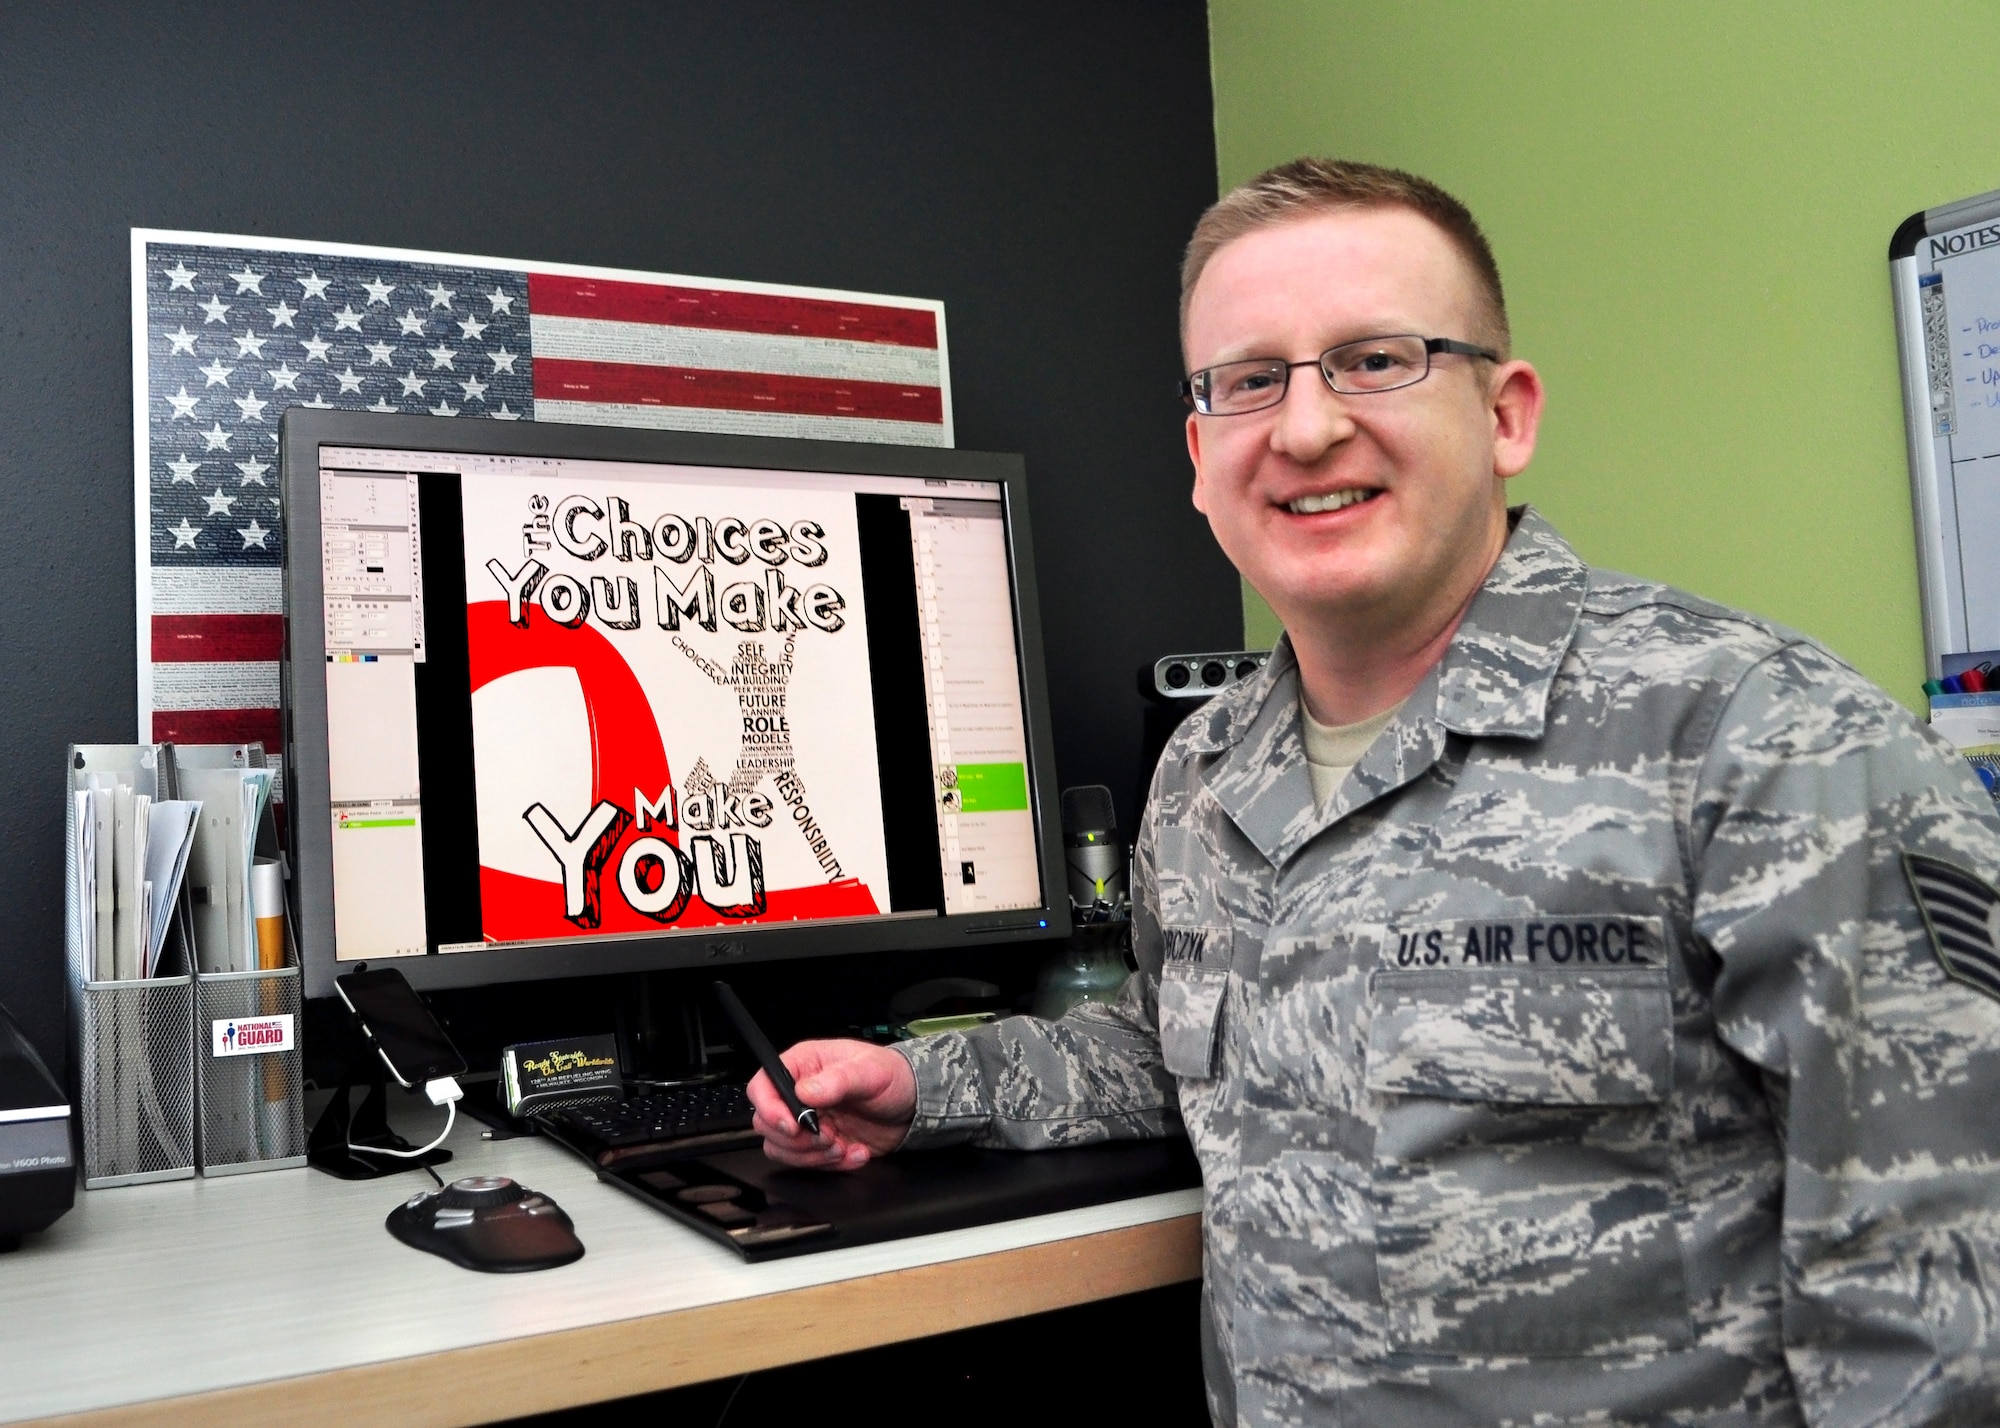 Tech. Sgt. Tom Sobczyk, a multimedia specialist with the Wisconsin National Guard's Drug Control Program, displays the Red Ribbon poster he submitted to this year's National Guard Bureau Media Contest.  The poster was designed was for Red Ribbon Week, an anti-drug campaign that takes place every year in October.  (U.S. Air Force photo by Tech. Sgt. Tom Sobczyk / Released)